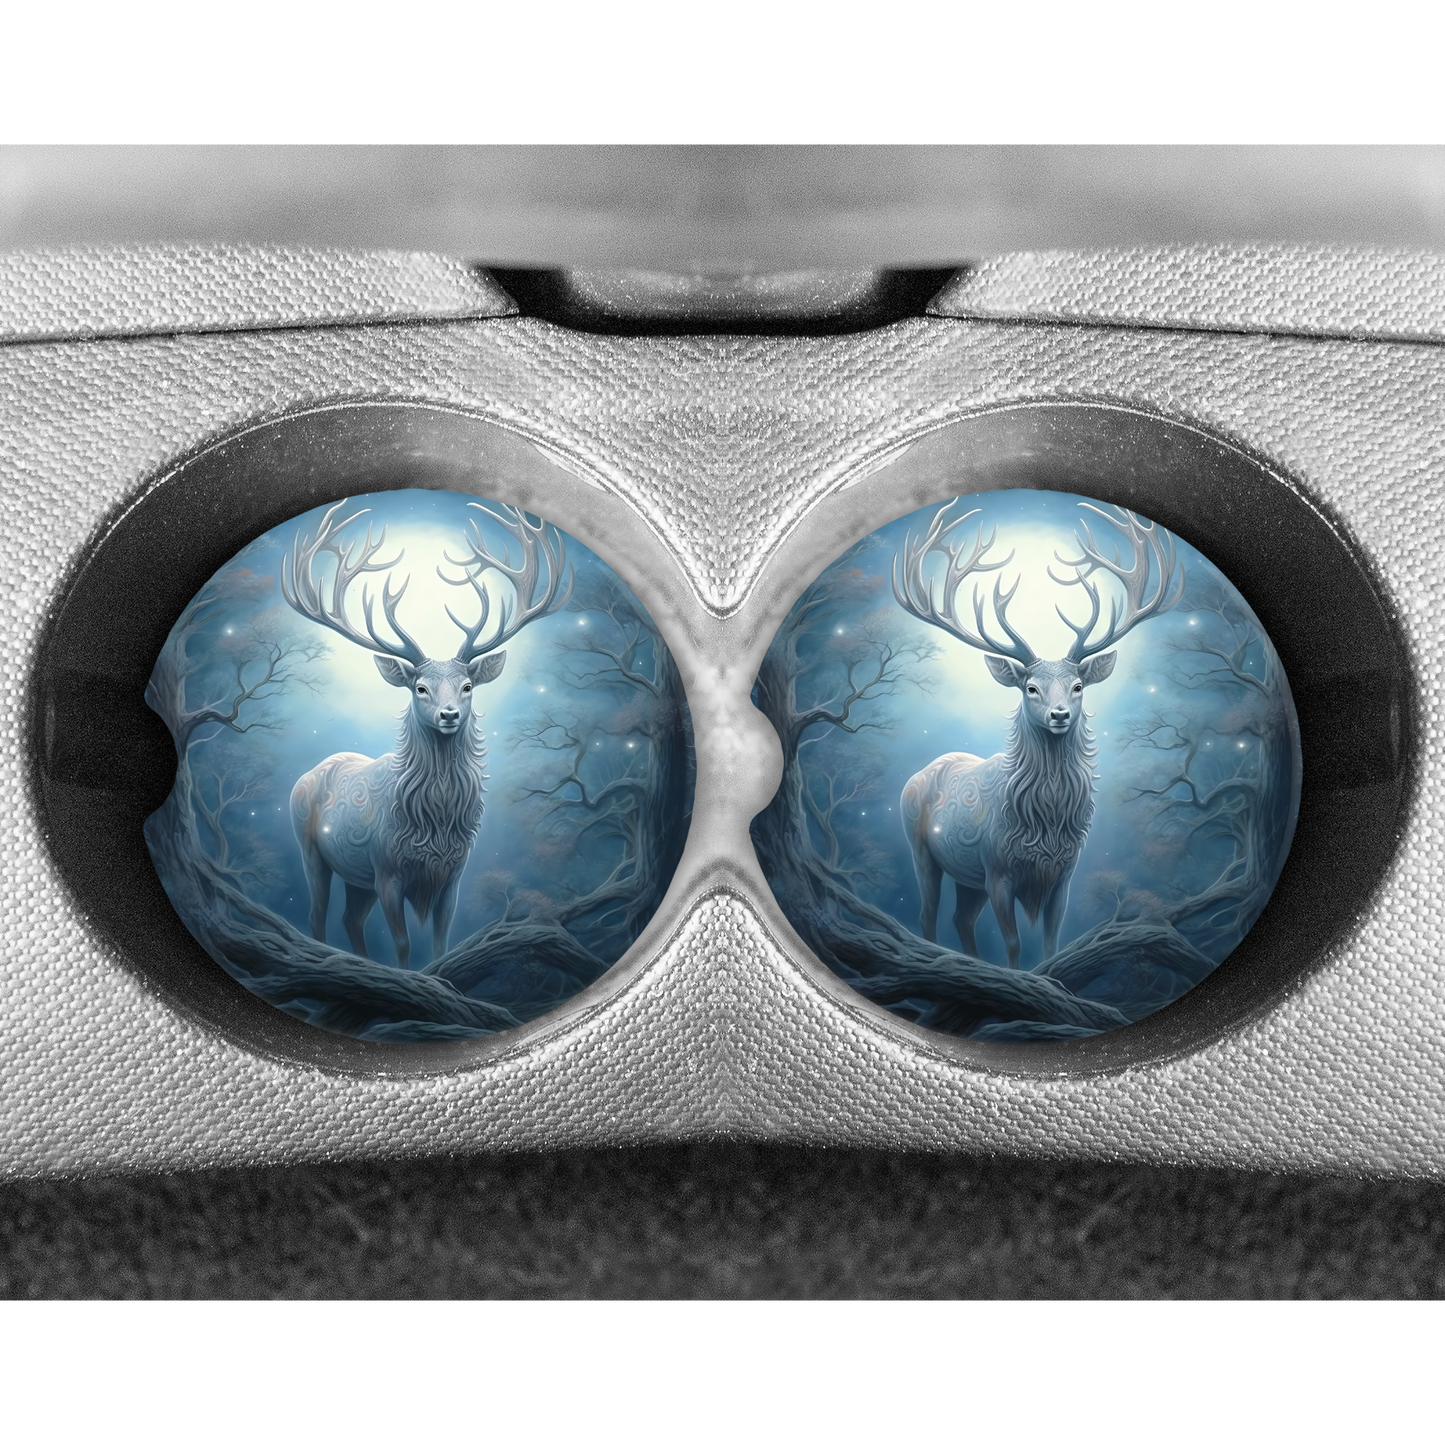 Premium Neoprene Car Coasters | Drink Holders for Your Car Console - Set of 2 Enchanted Stag Design